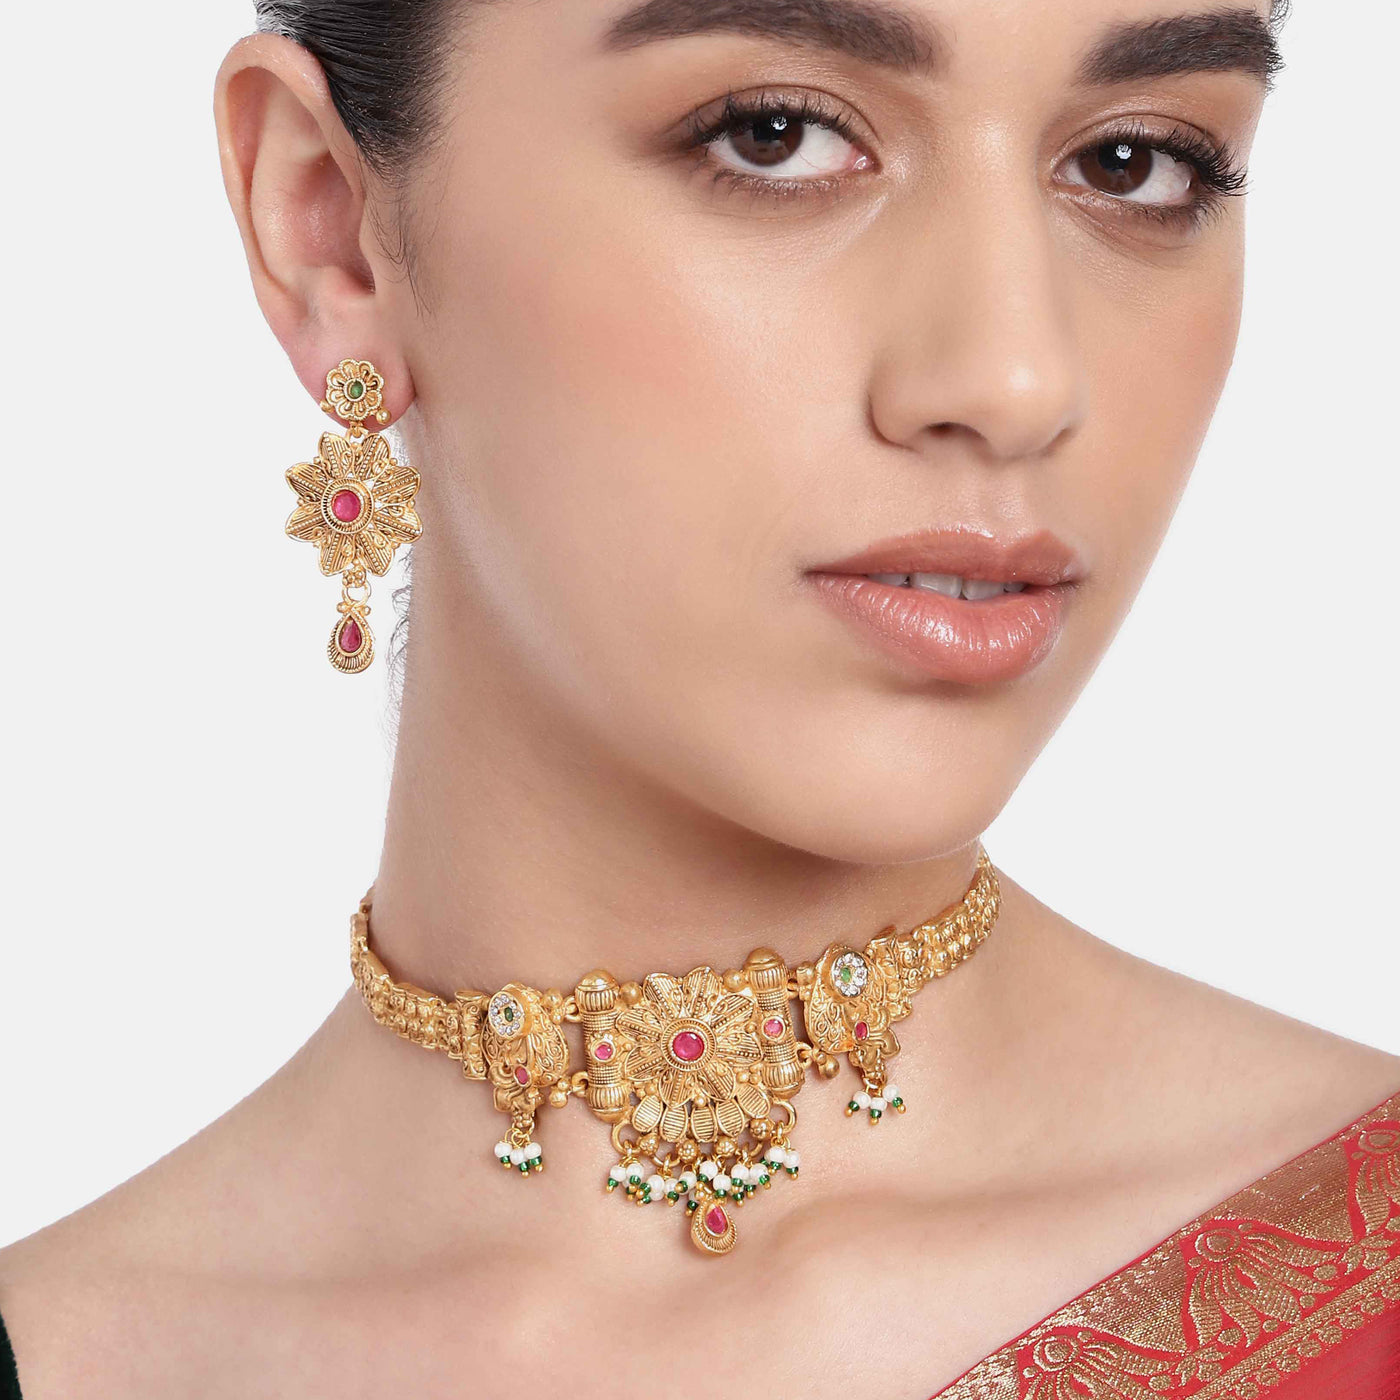 Estele Gold Plated Magnificent Floral Matte Finish Choker Necklace Set with Multi-color Crystals for Women